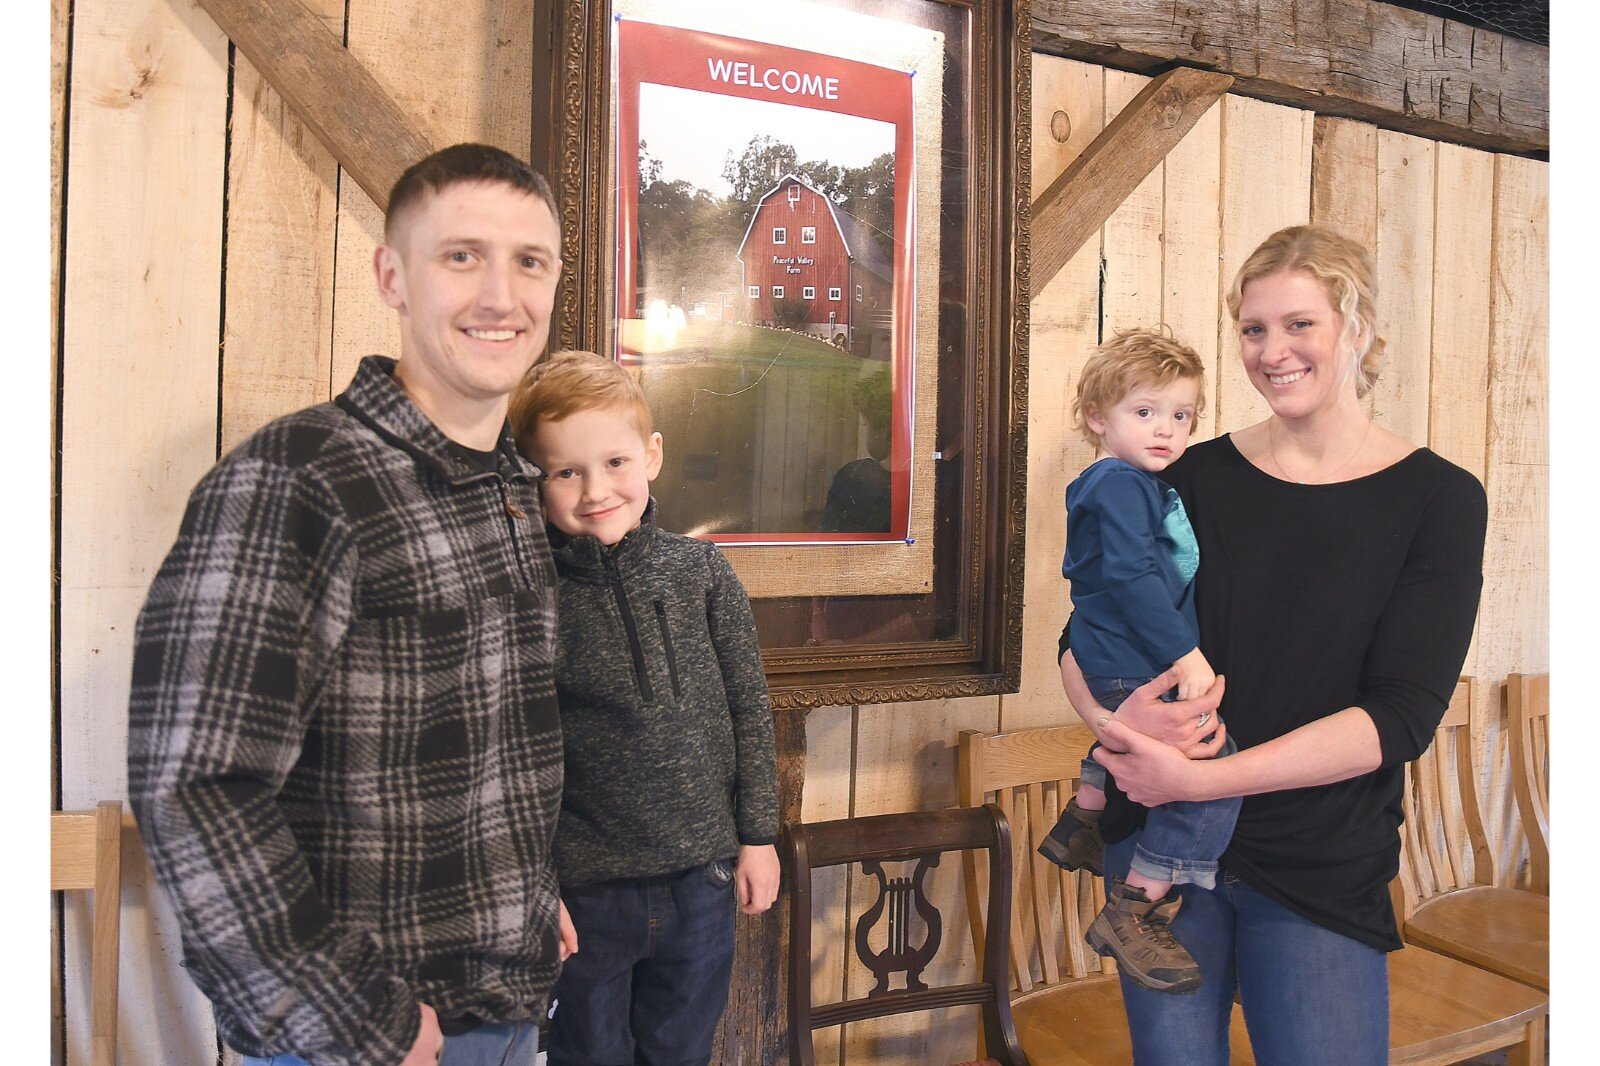 Cody and Terin Warner are the new owners of the barn and property. They are seen with their sons, Chase, left, and Noah.